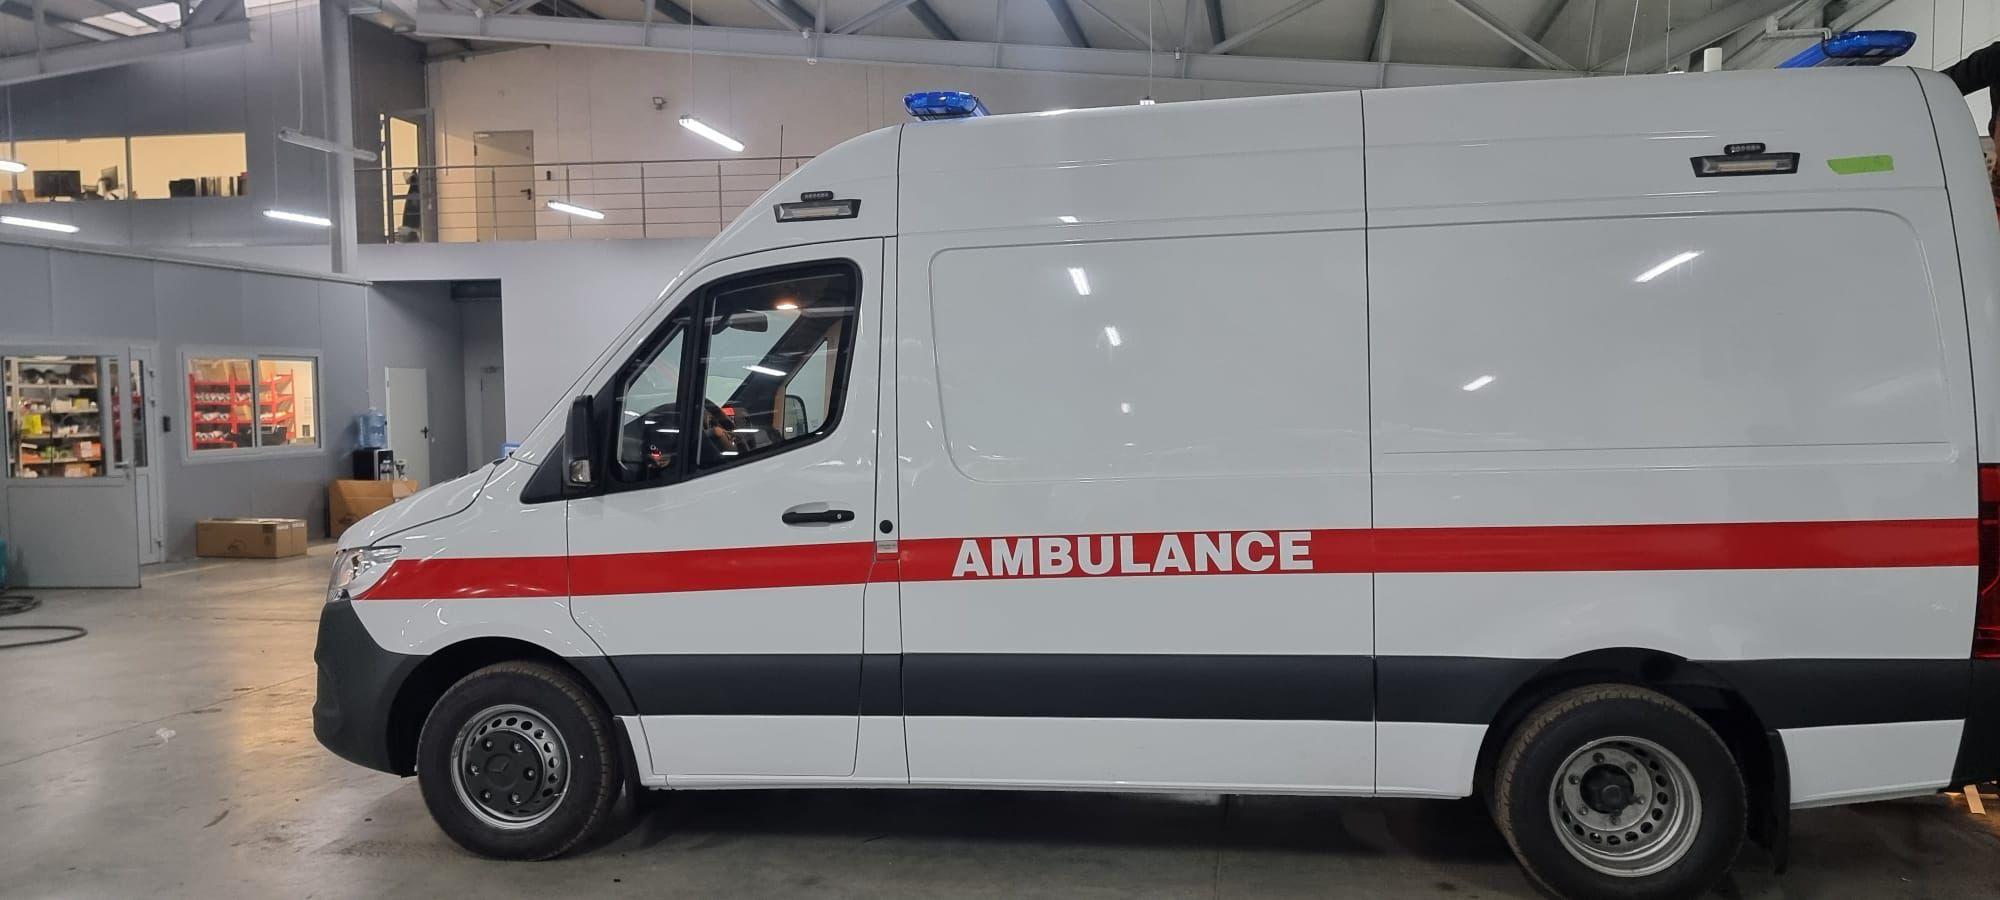 Israel’s Ministry of Defense Delivers Four Armored Ambulances to Ukraine